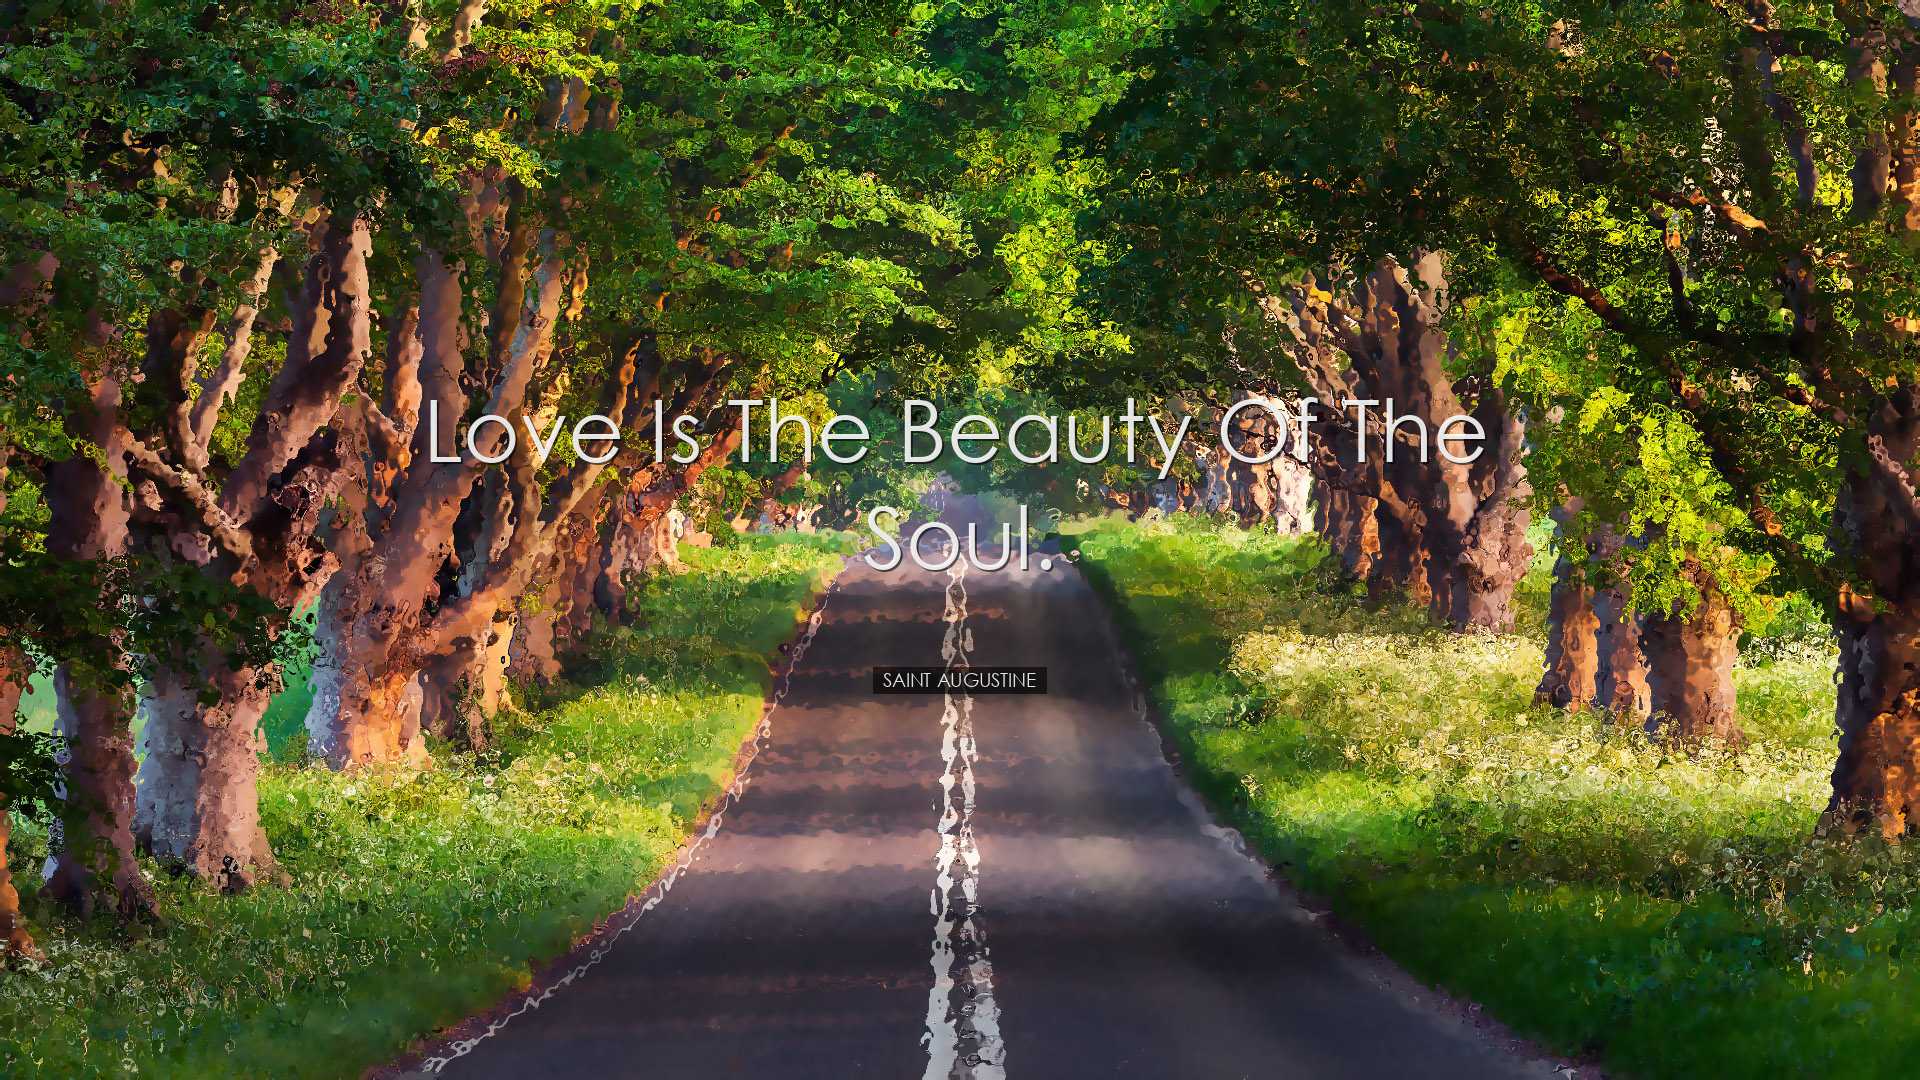 Love is the beauty of the soul. - Saint Augustine